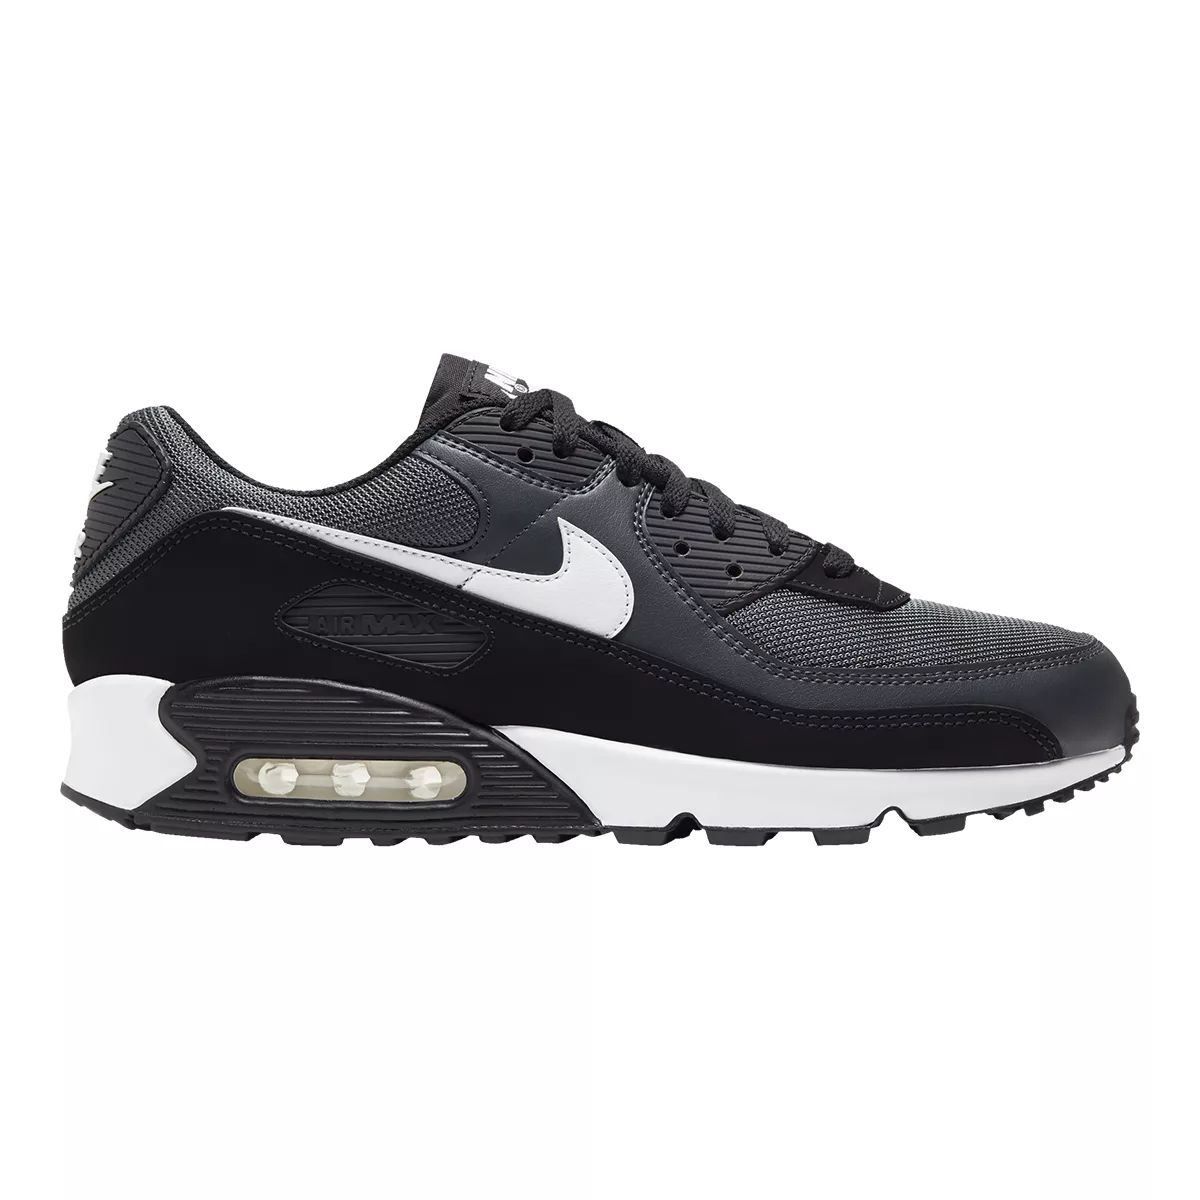 Nike Men's Air Max 90 Shoes Sneakers Low Top Cushioned